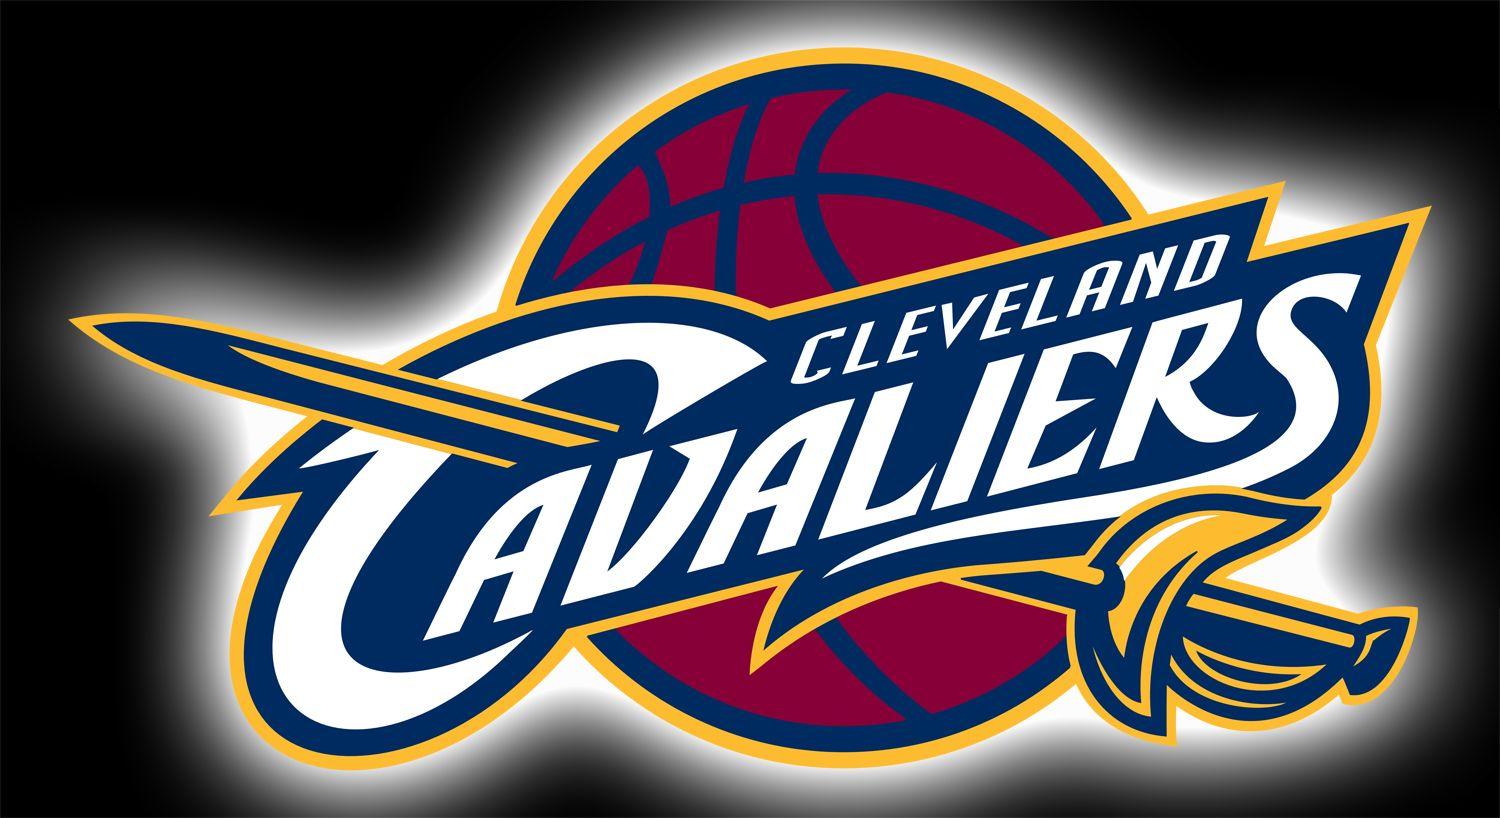 Cavaliers Logo - CAVS Logo, Cleveland Cavaliers symbol, meaning